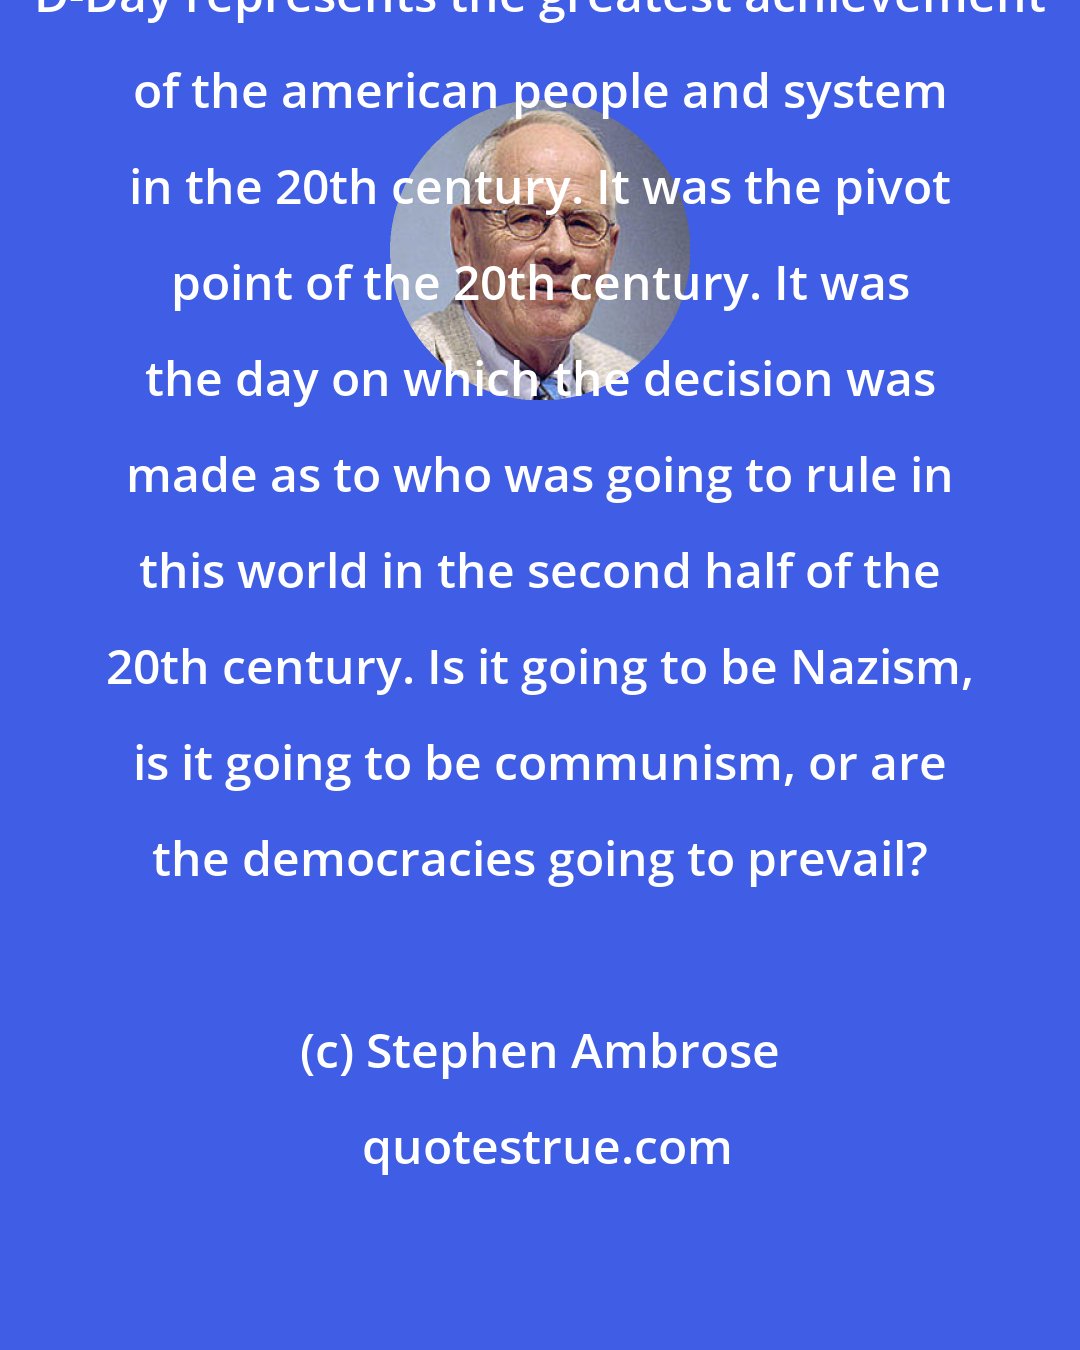 Stephen Ambrose: D-Day represents the greatest achievement of the american people and system in the 20th century. It was the pivot point of the 20th century. It was the day on which the decision was made as to who was going to rule in this world in the second half of the 20th century. Is it going to be Nazism, is it going to be communism, or are the democracies going to prevail?